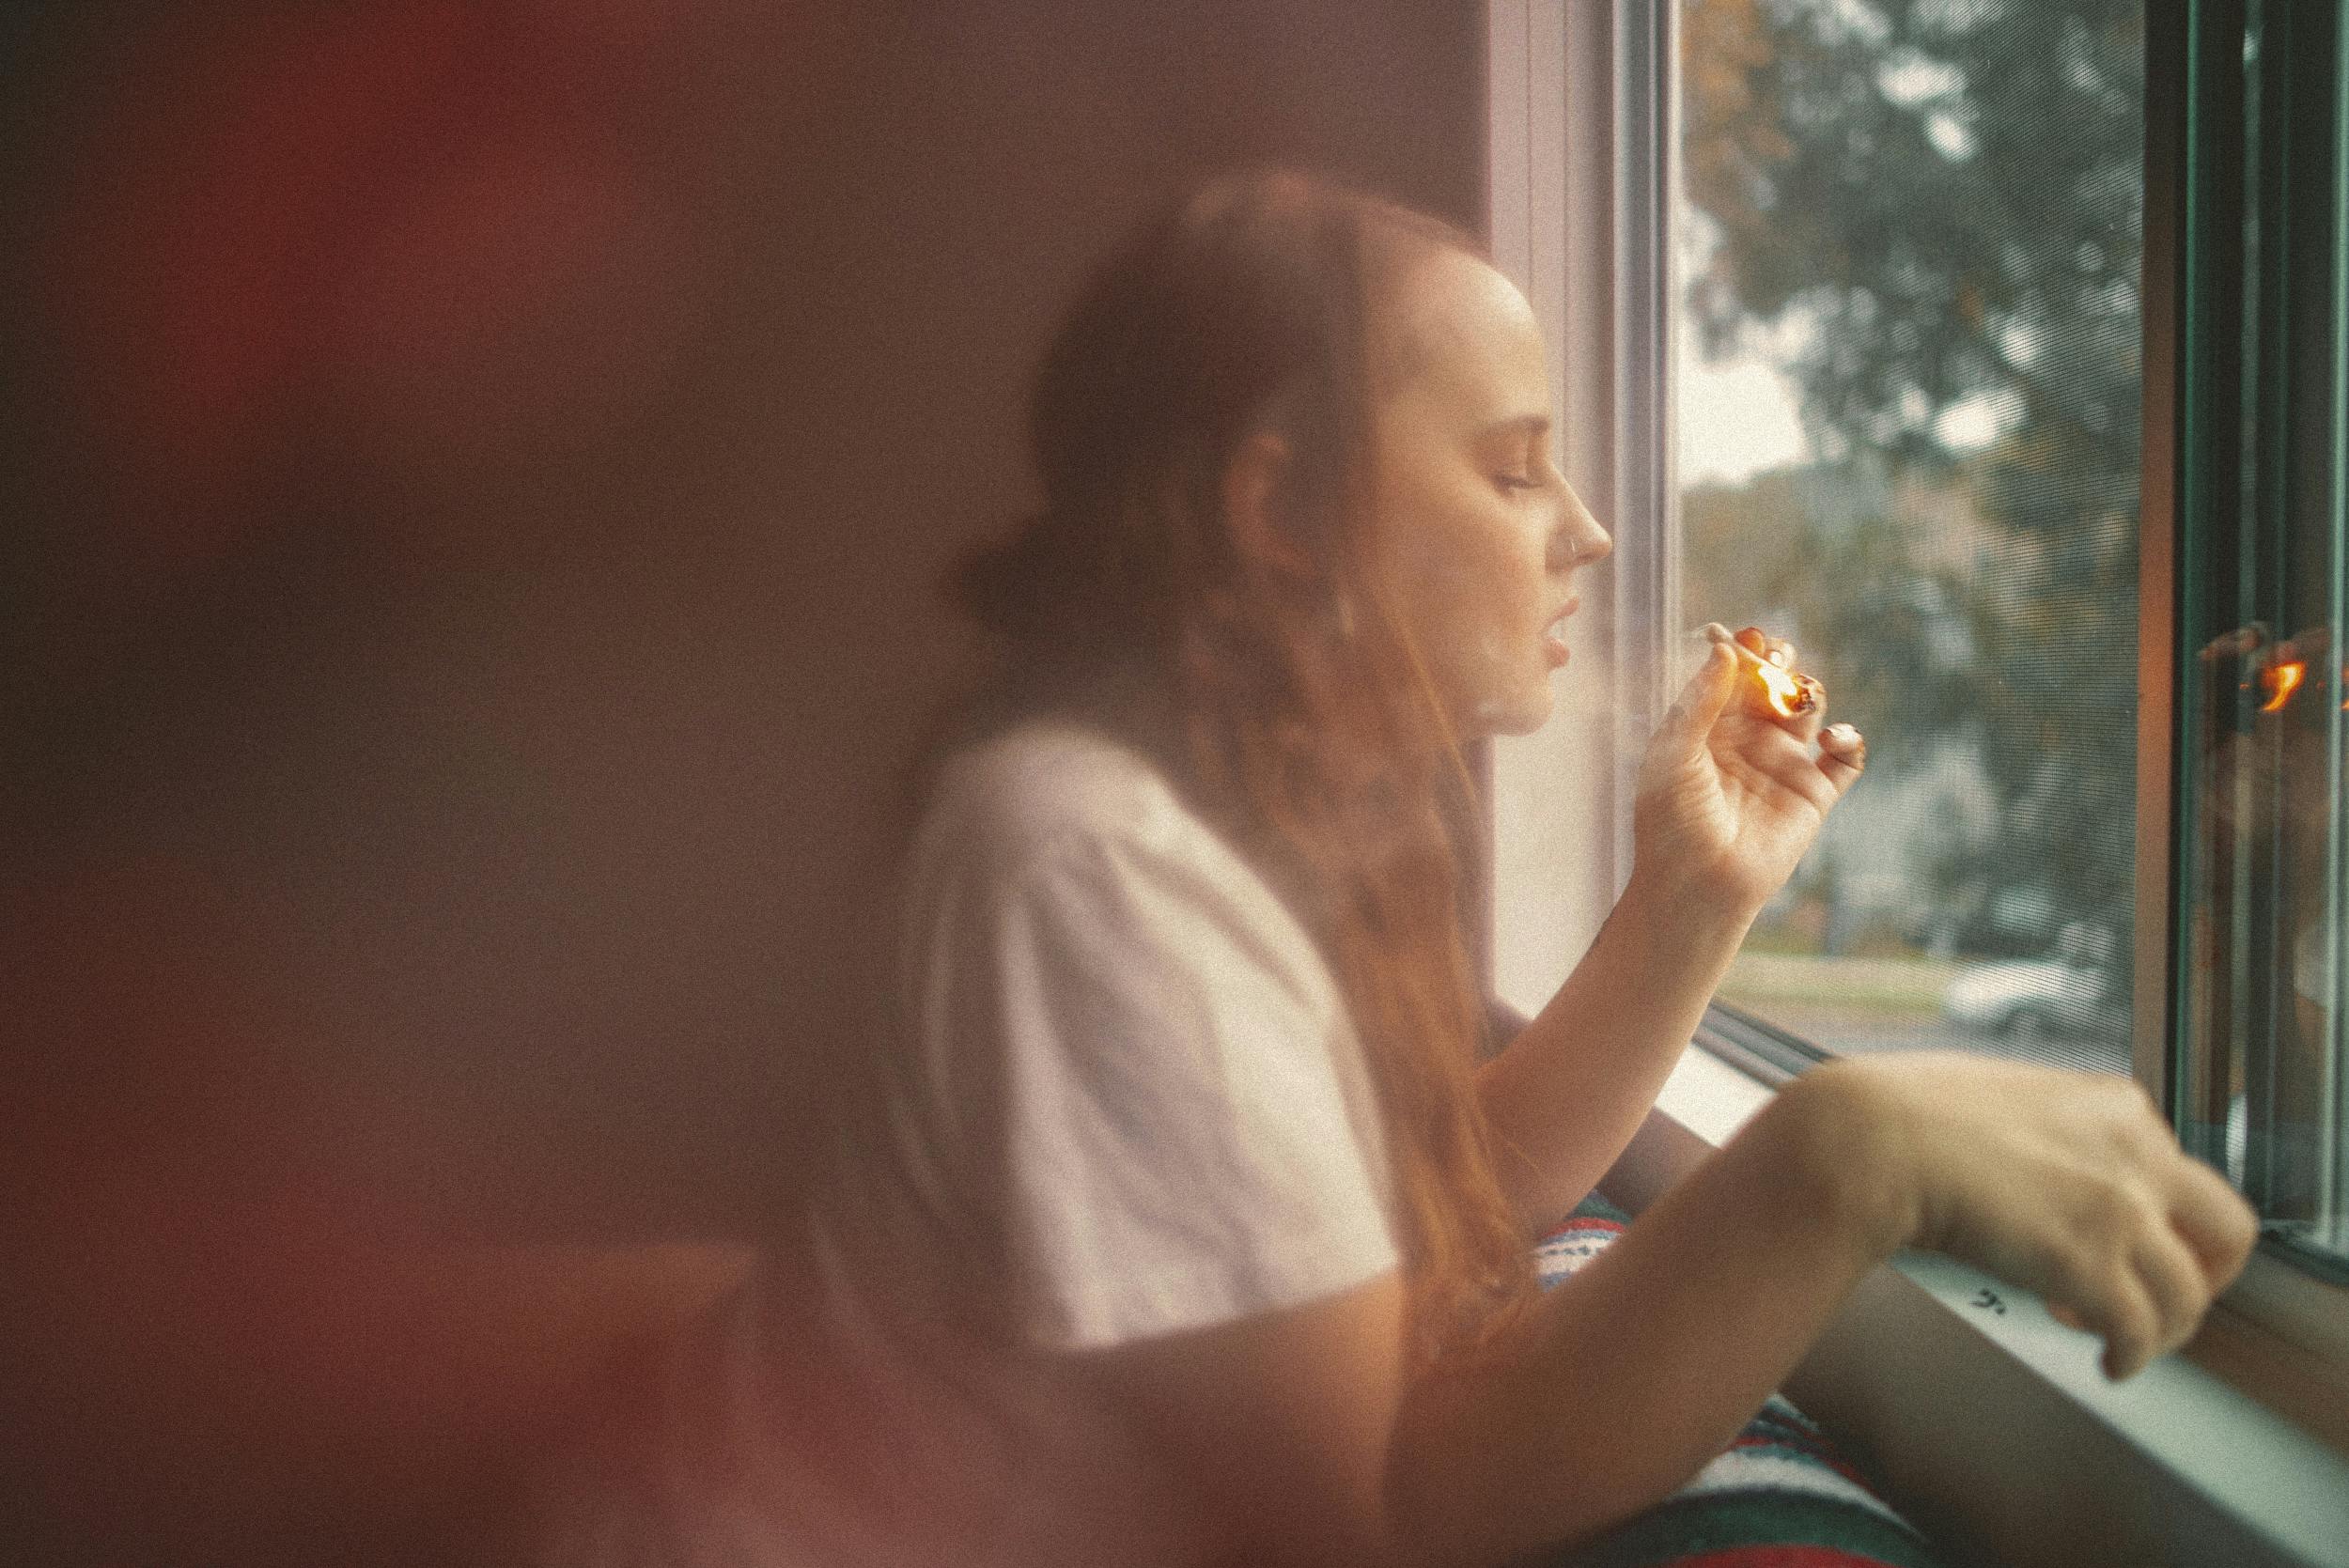 A woman leans out of a window smoking one of the best weed strains